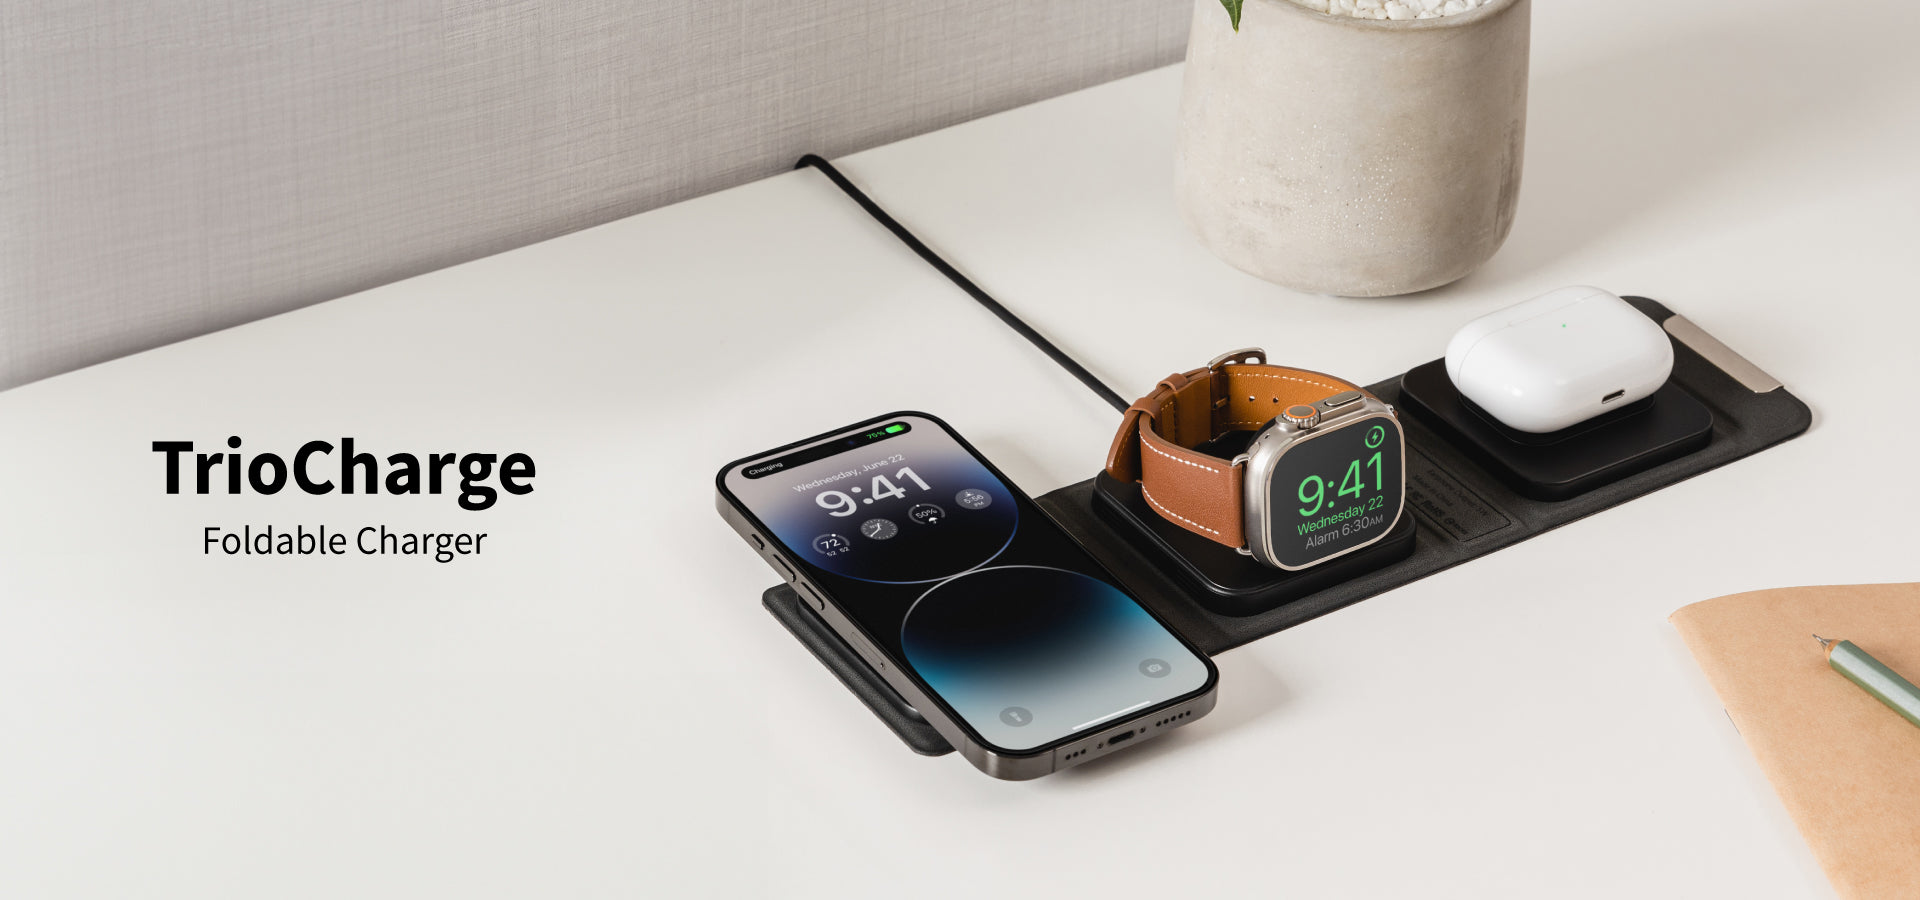 SwitchEasy TrioCharge 15W Fast Charging Portable Wireless Charger